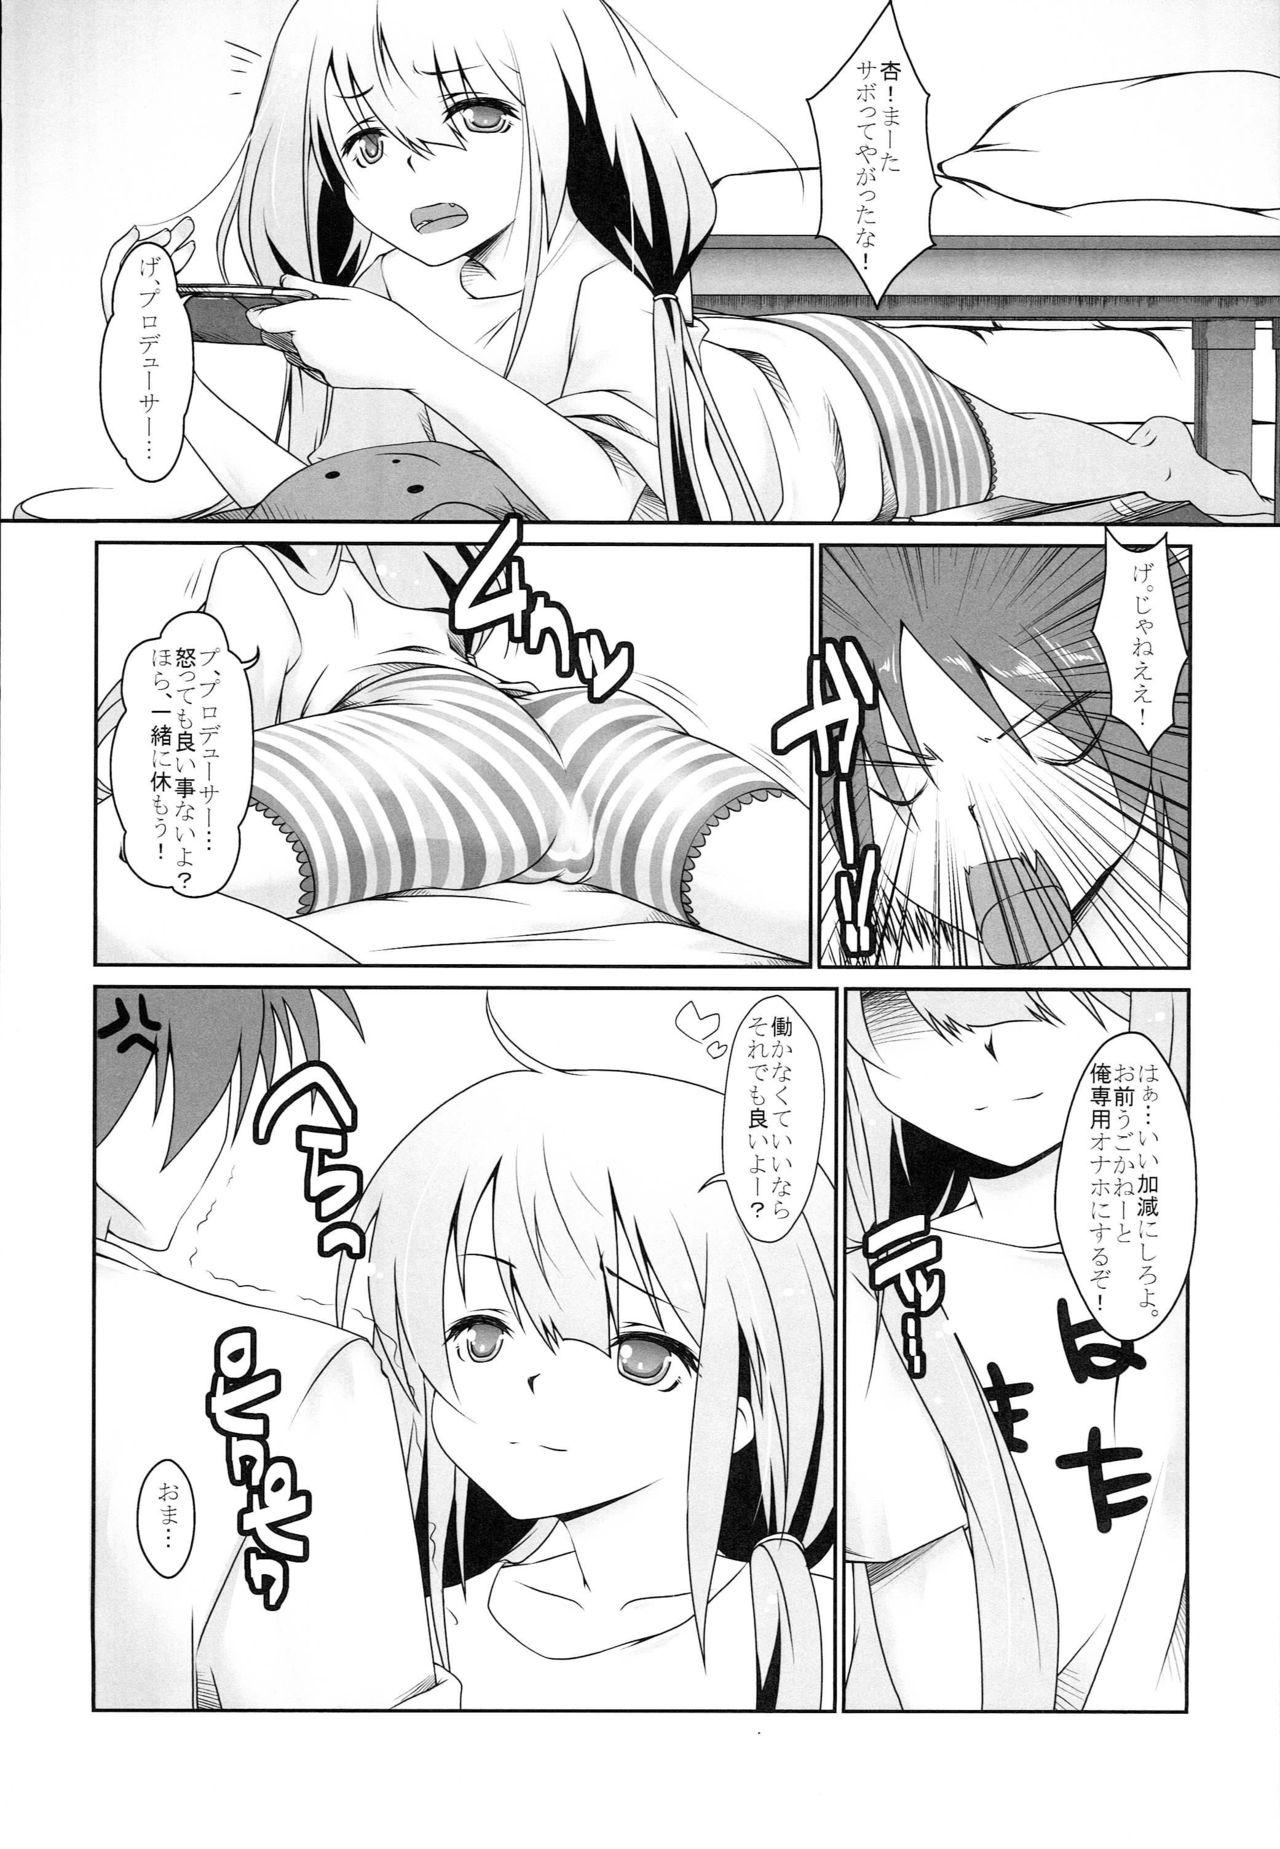 Dick Sucking MONOCHRO APPLE VOL 01 - The idolmaster Pounded - Page 2